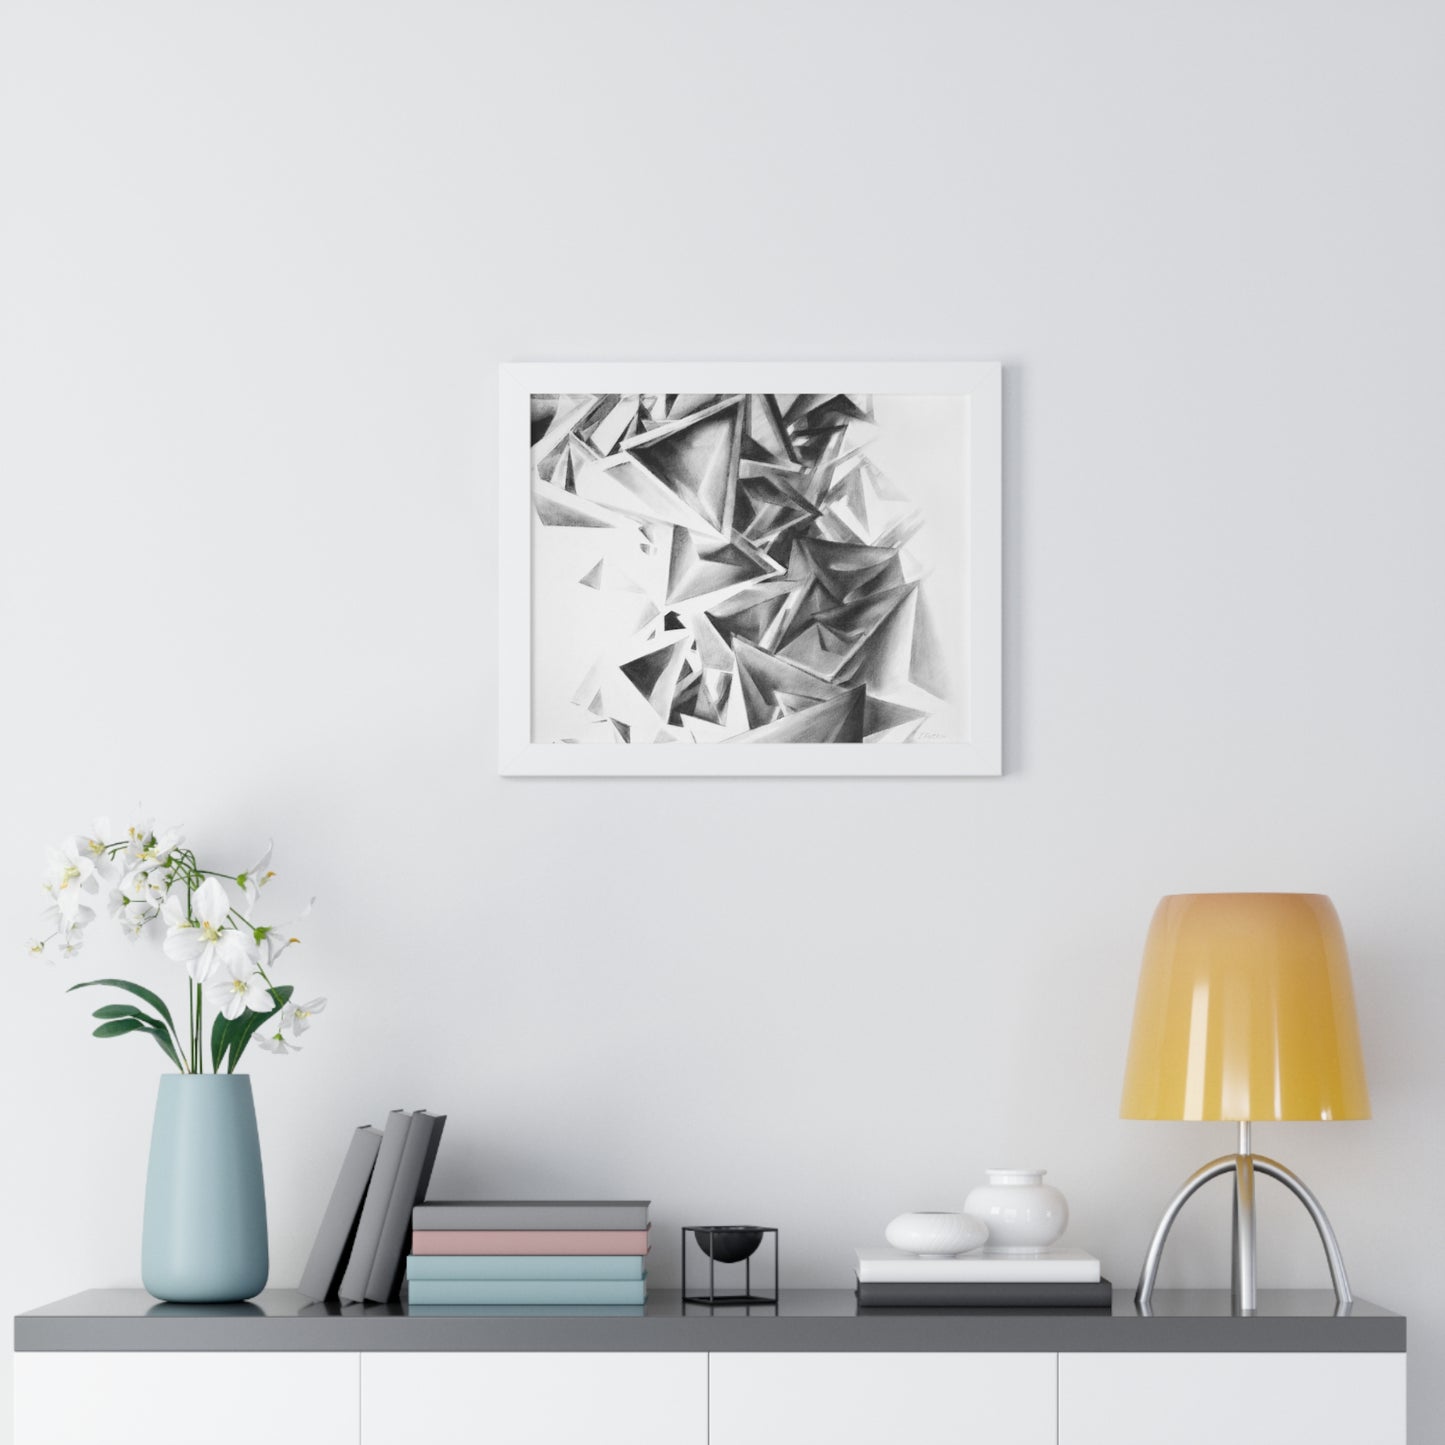 Whirlstructure II - Framed Poster Print, Wall Art, Charcoal, Abstract Black and White Decor